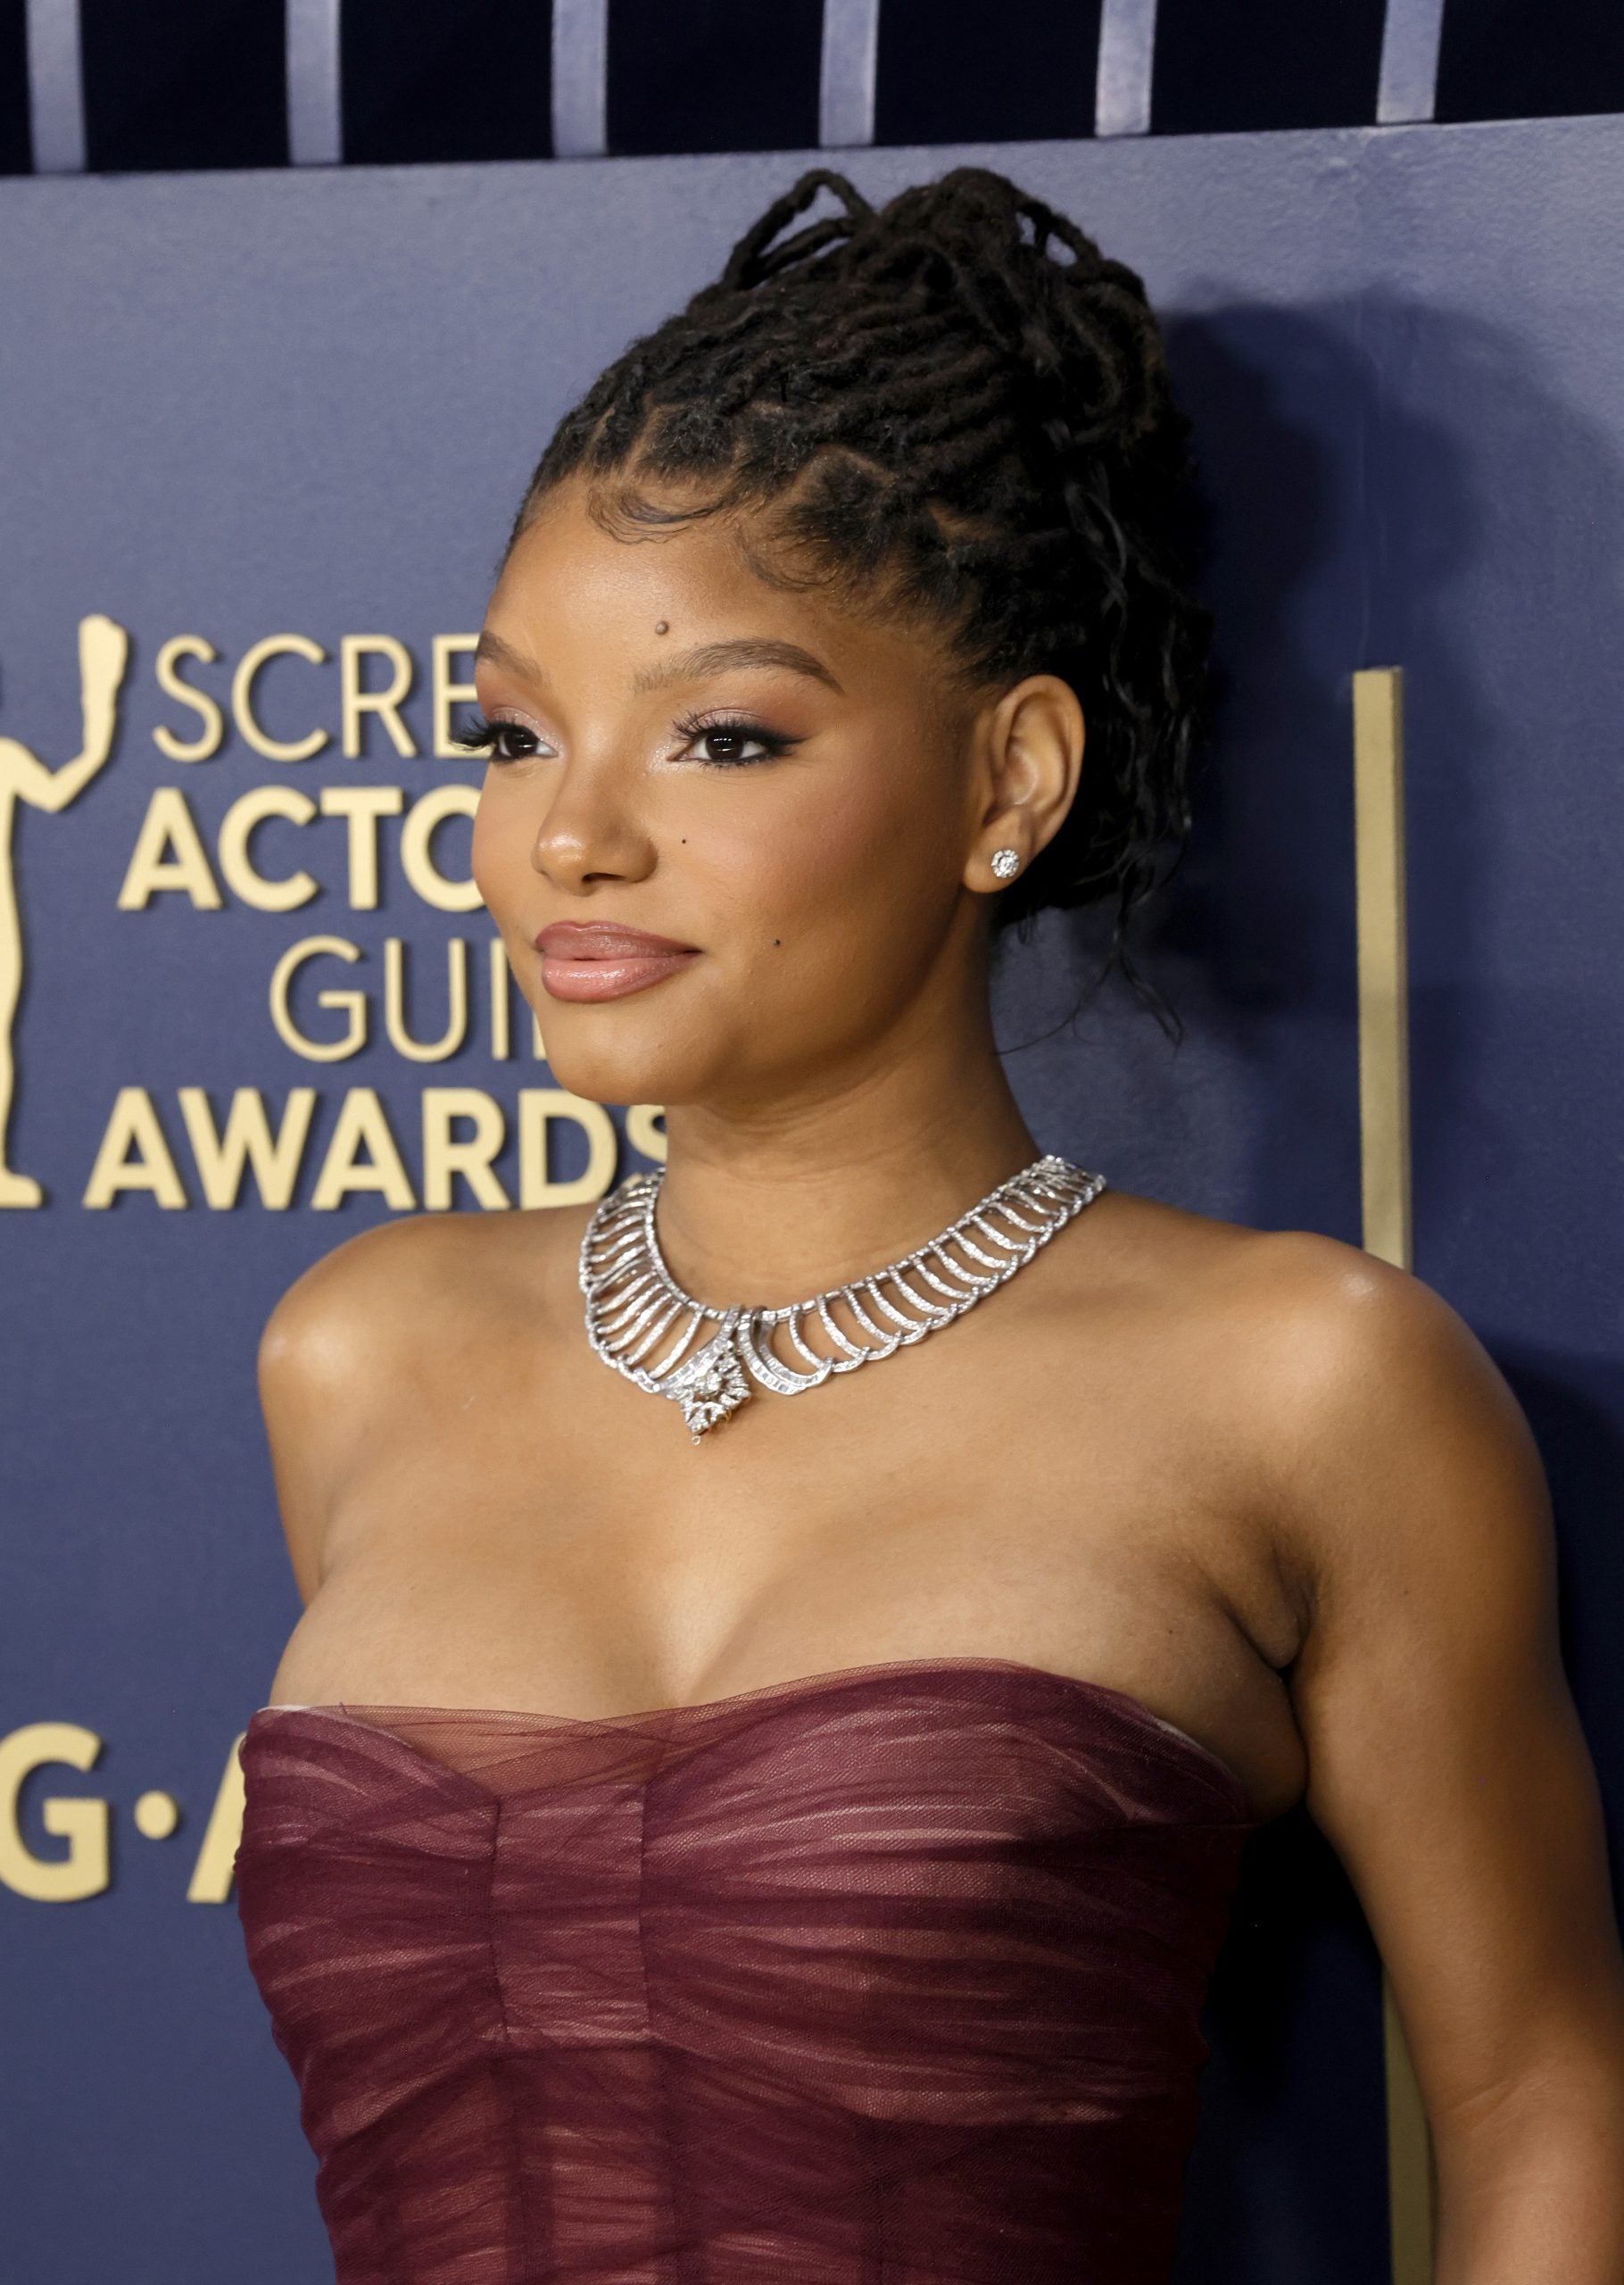 16 Beauty Looks From The SAG Awards
